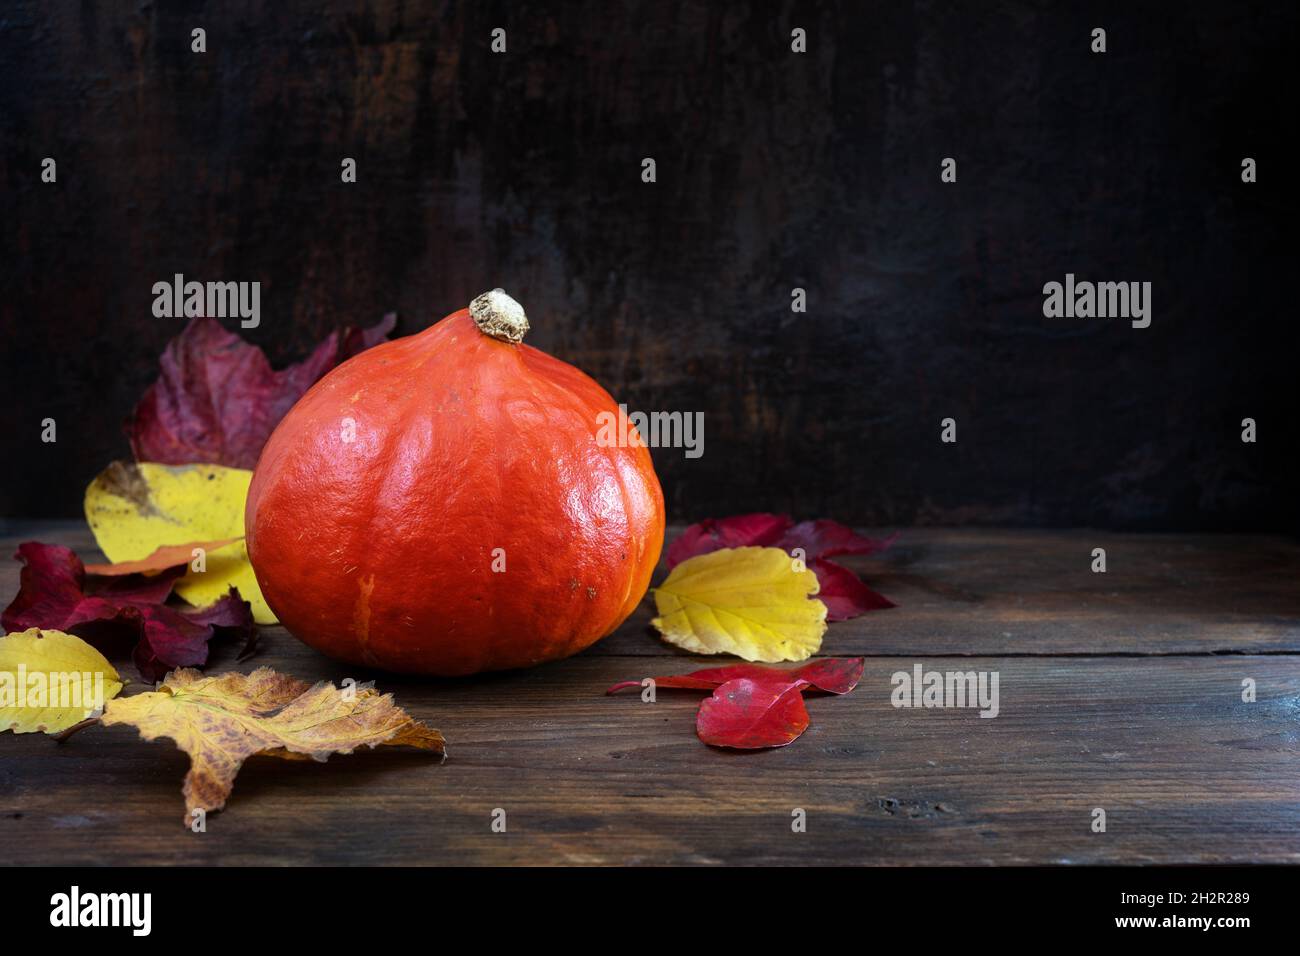 Red kuri squash or Hokkaido pumpkin on dark rustic wooden planks with autumn leaves, seasonal vegetable for Thanksgiving and Halloween, copy space, se Stock Photo